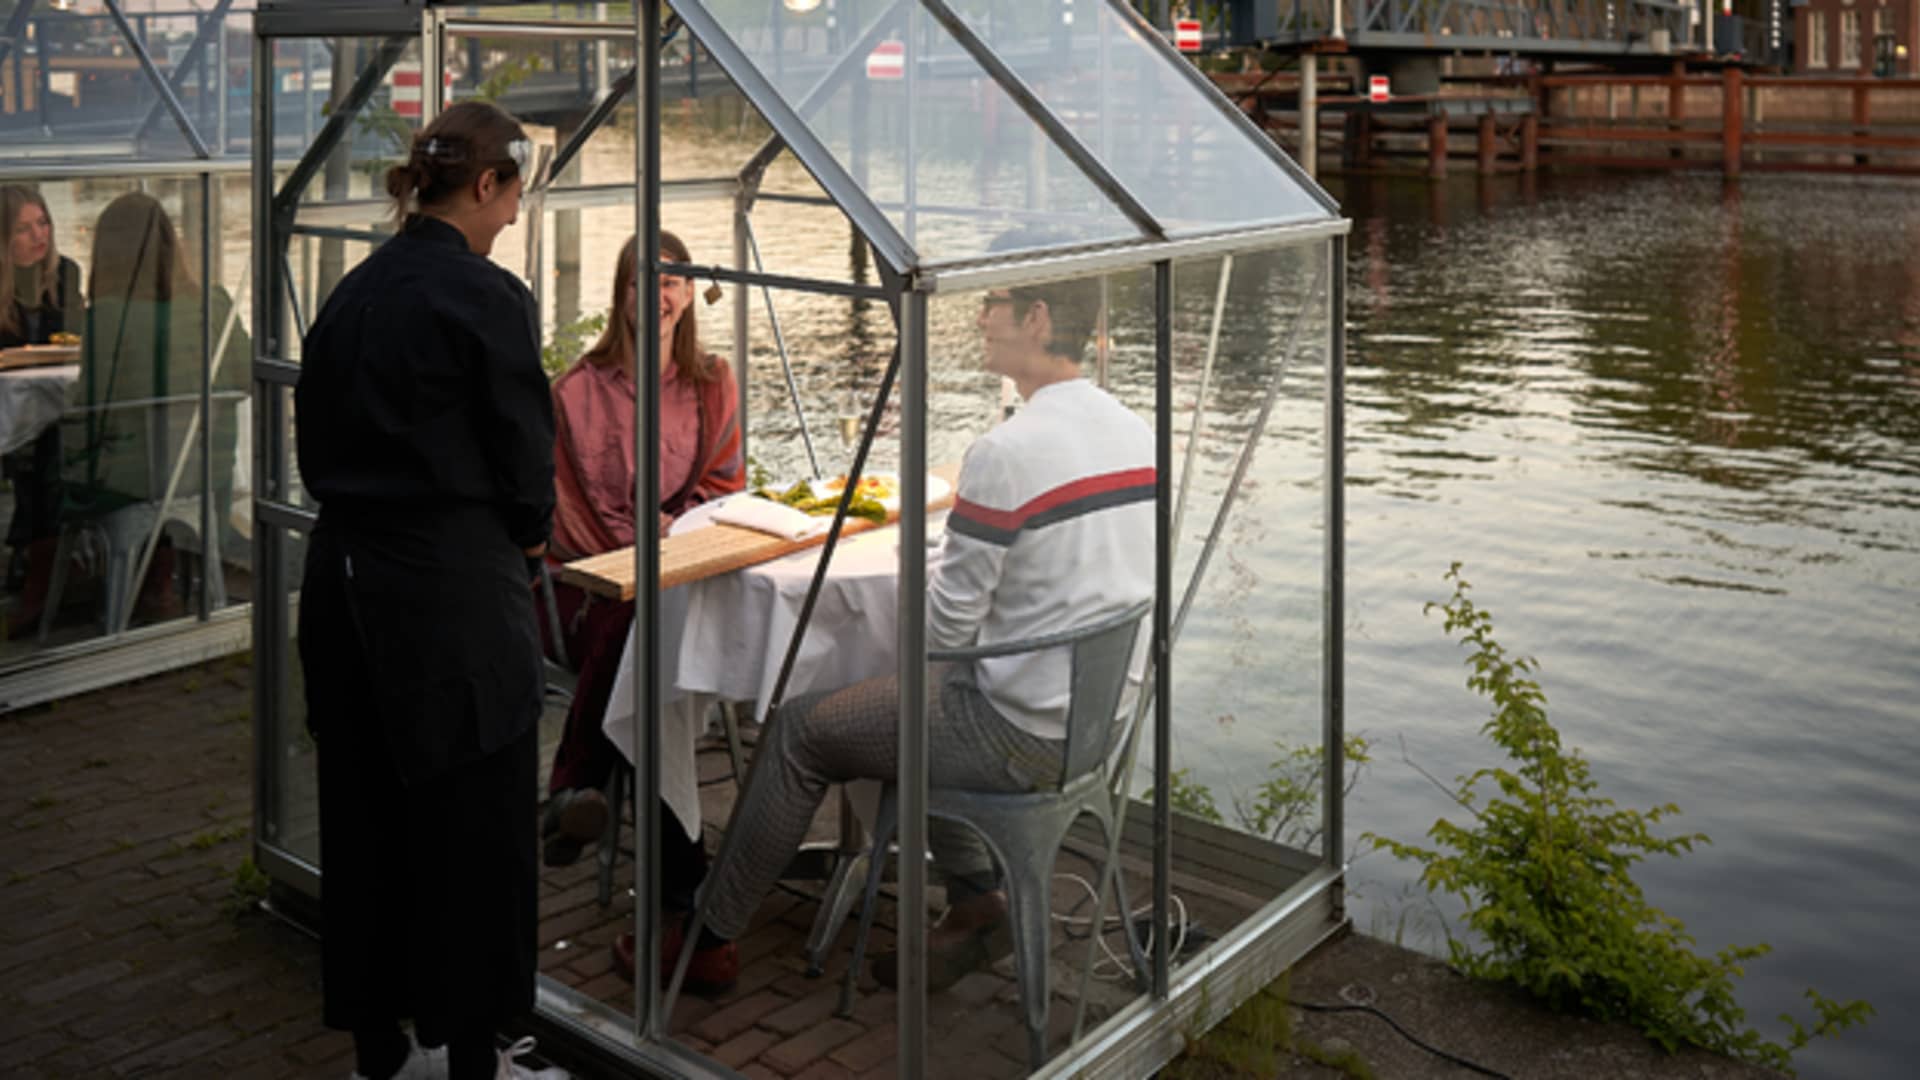 A server at Mediatic ETEN uses a wooden board to serve food to diners inside a greenhouse.